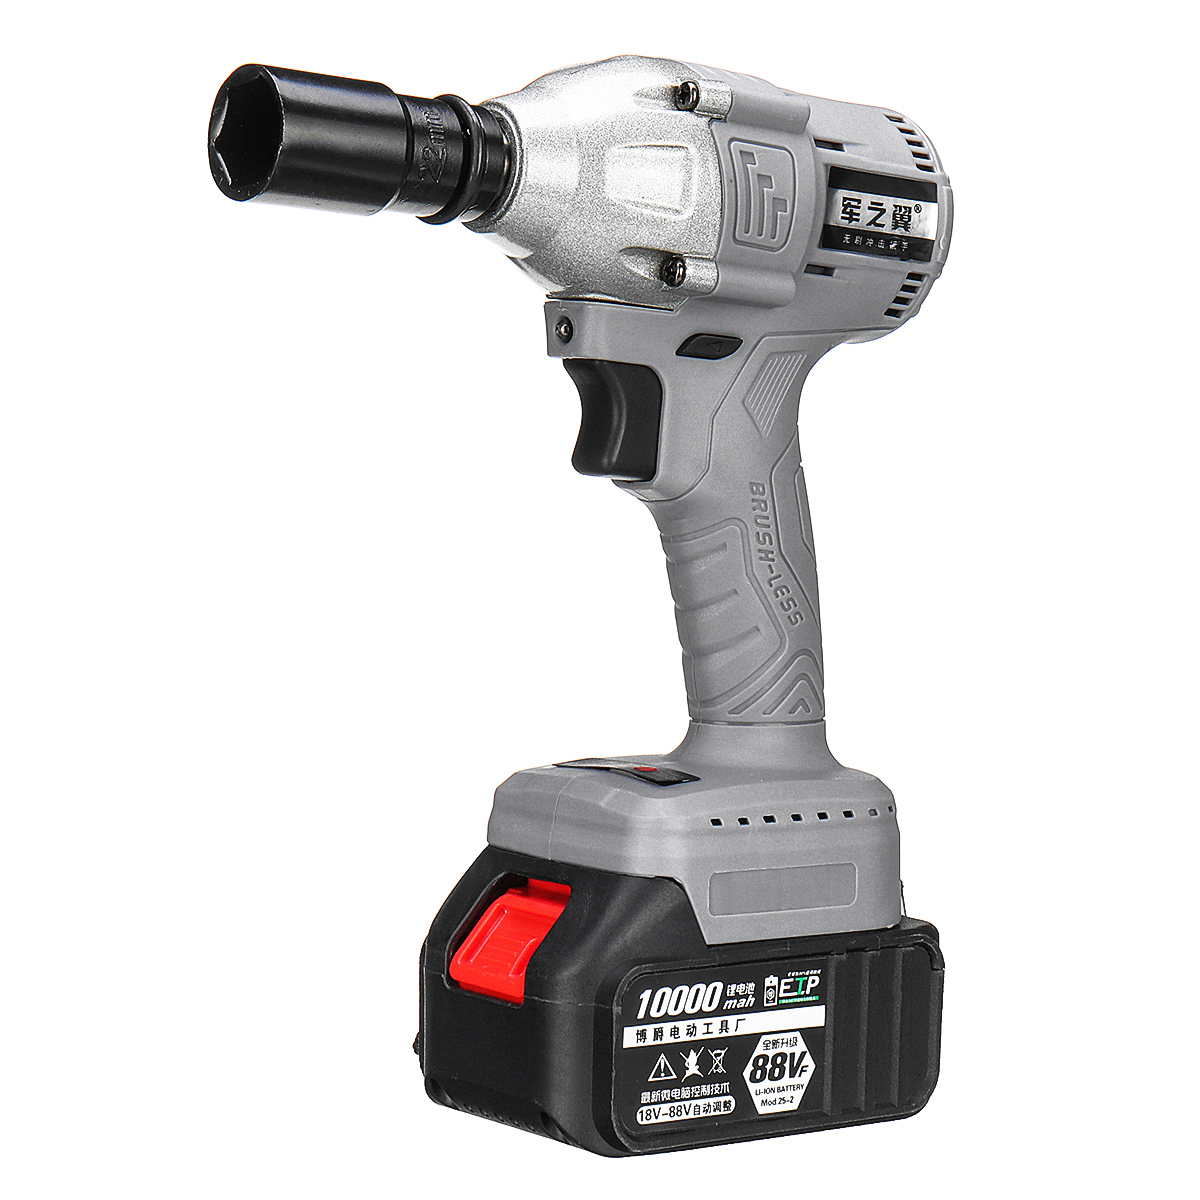 

21V Cordless Brushless Electric Impact Wrench LED light High Torque with 2 Li-ion Battery